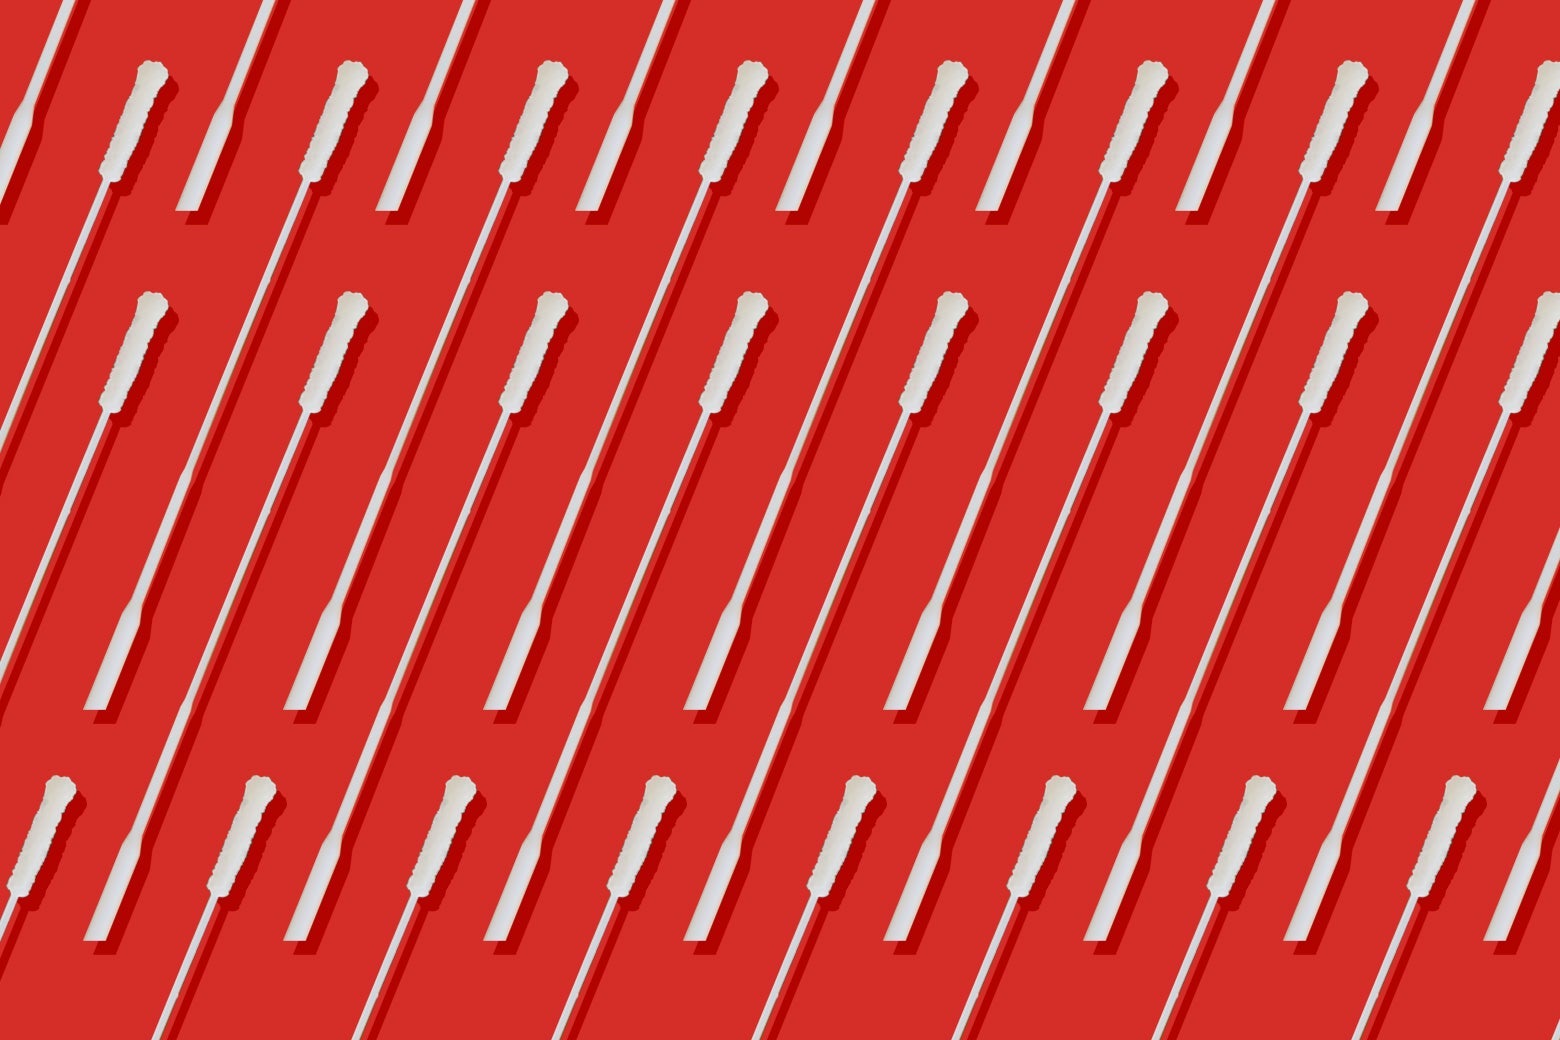 Rows of nasal swabs on a red background.